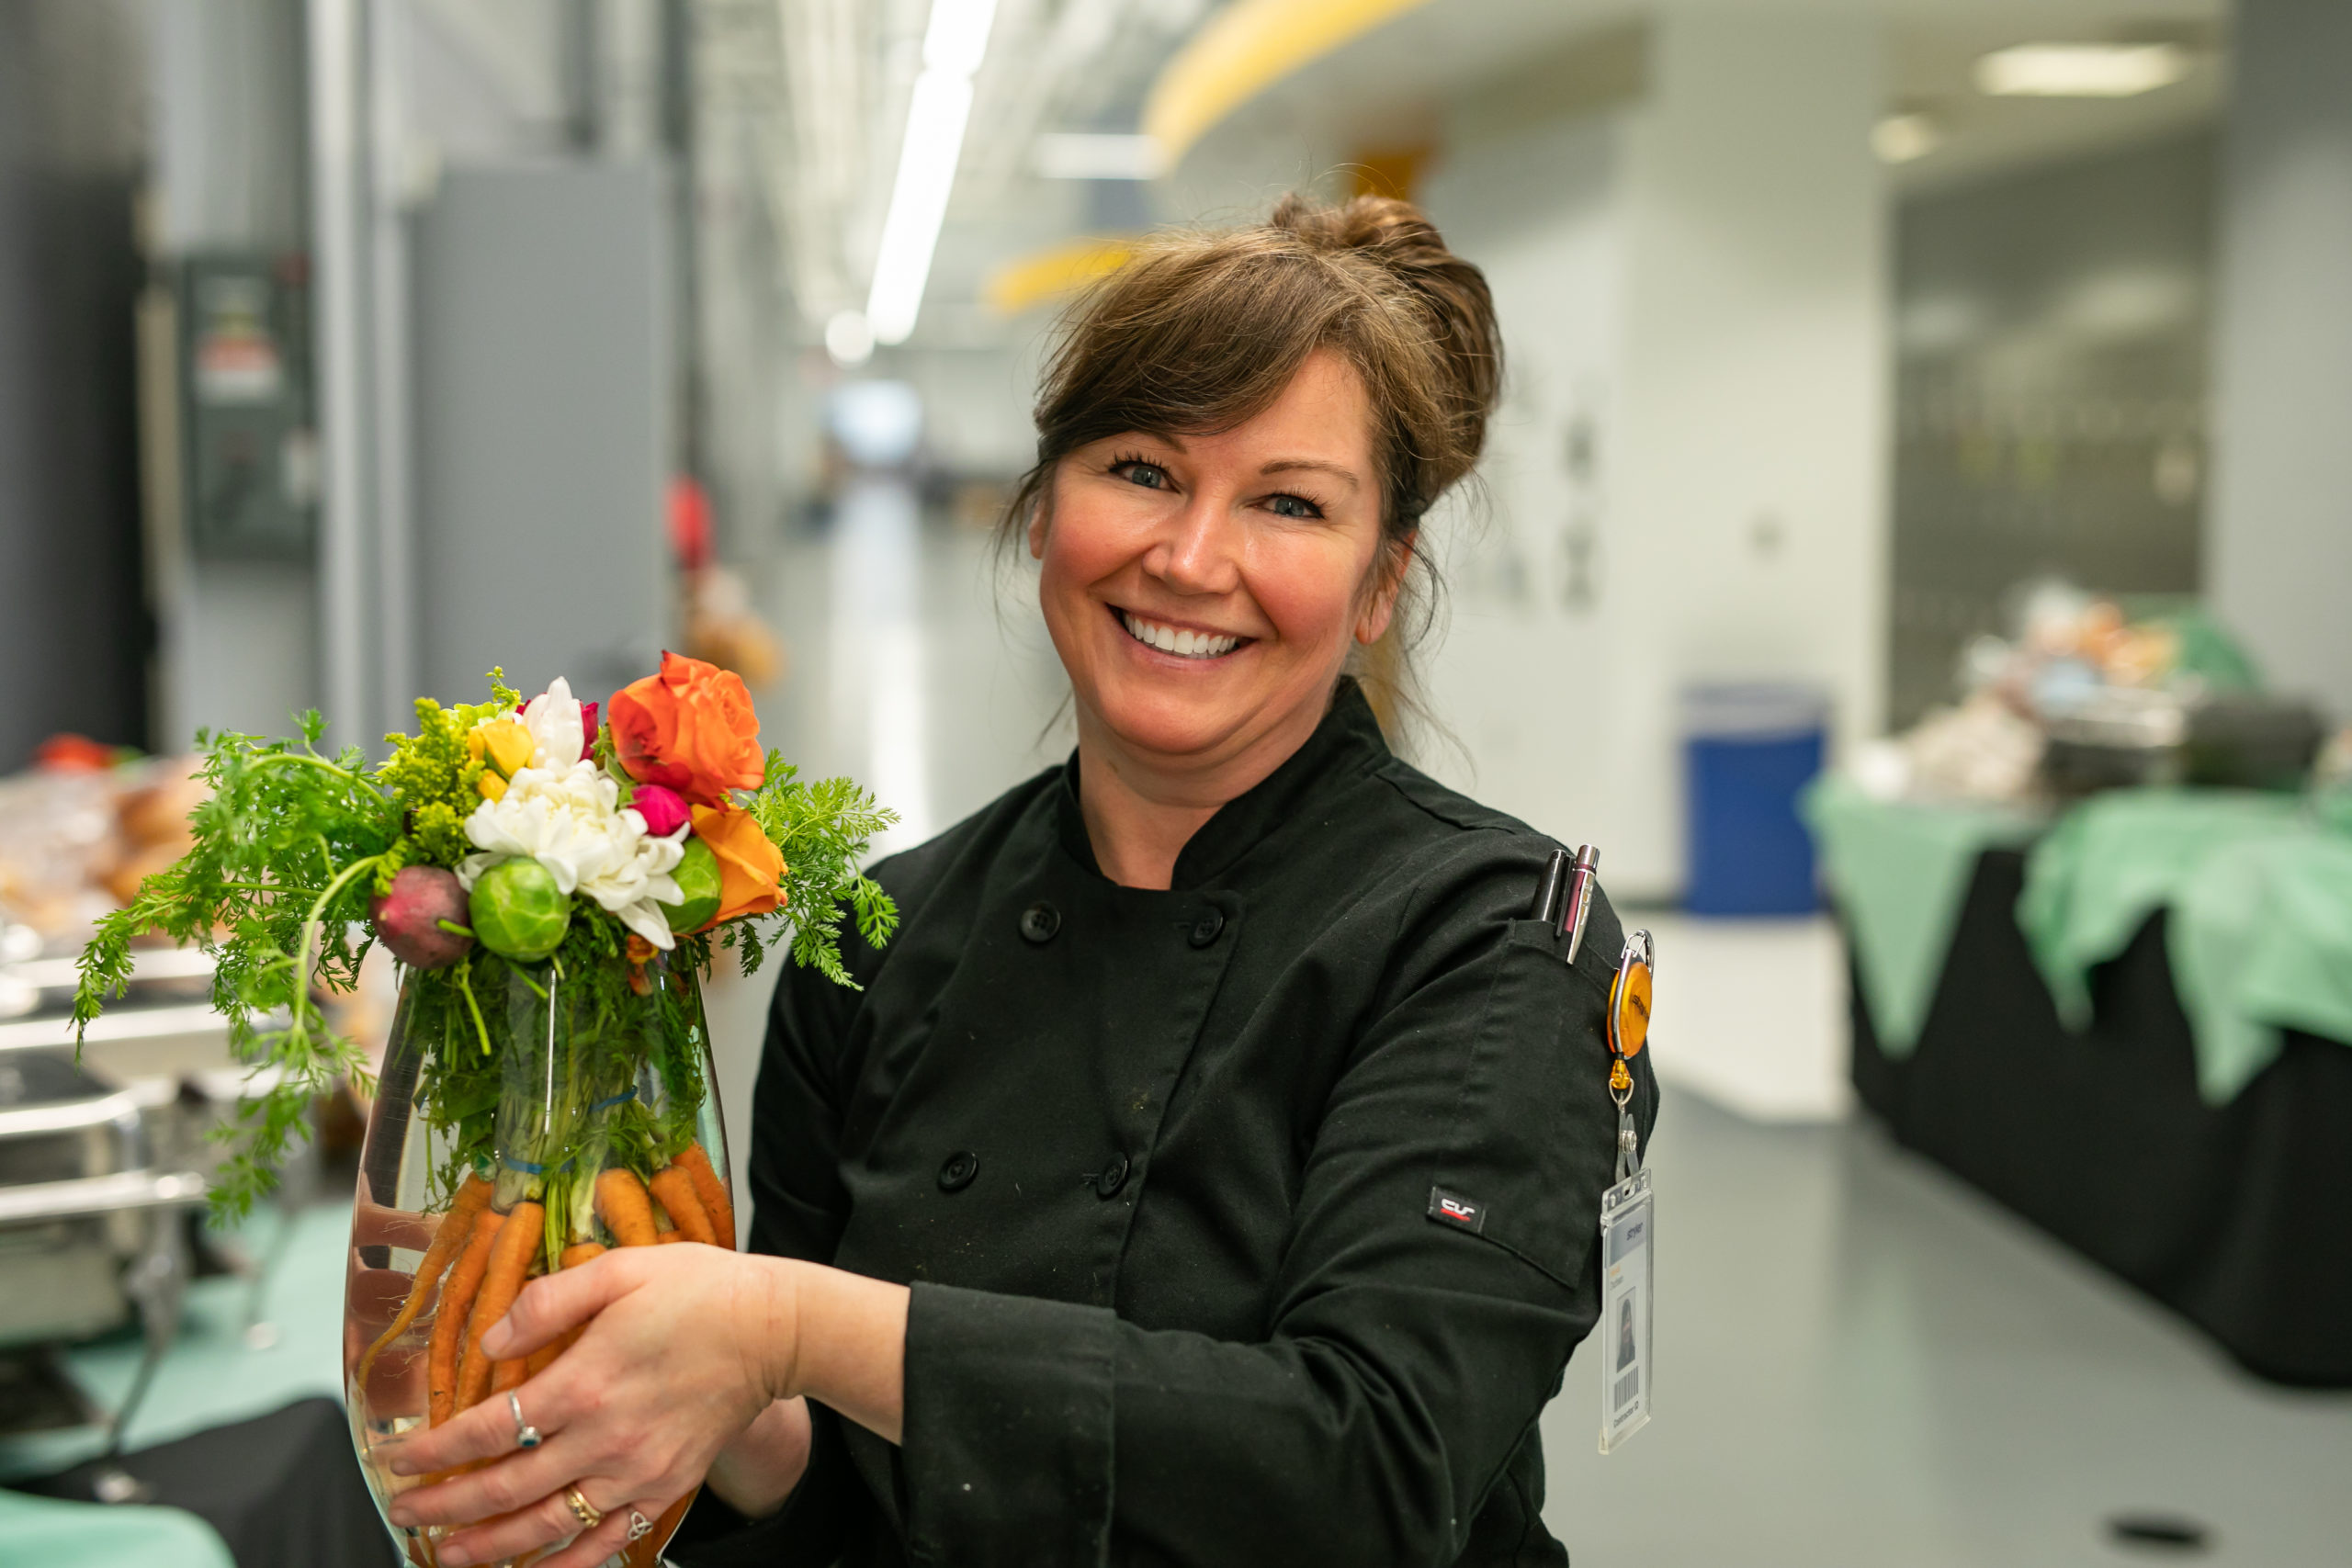 Creative Dining Employee Smiling Holding Vase With Flowers and Vegetables